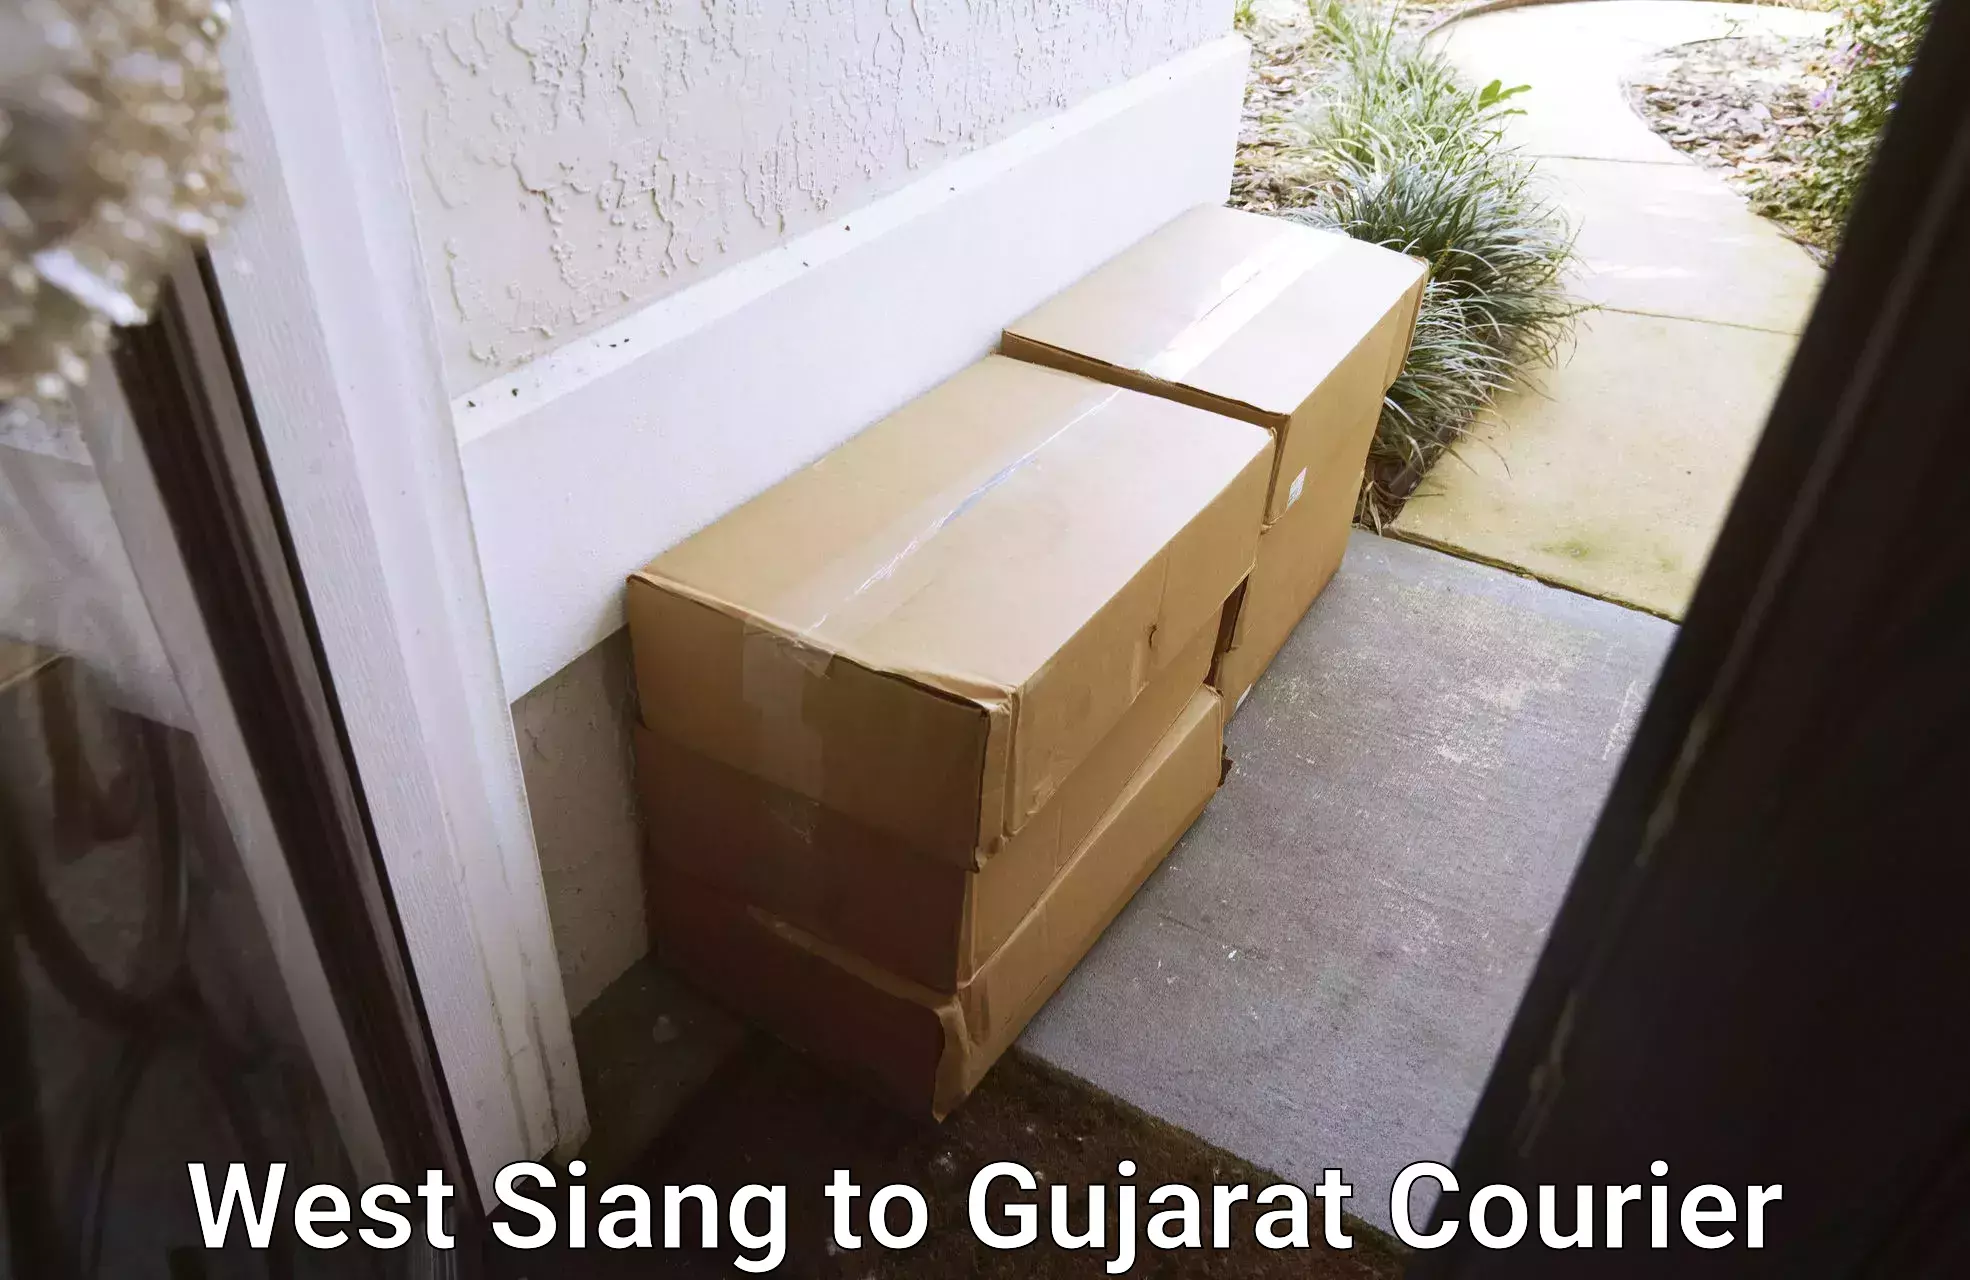 Courier app West Siang to Mehsana